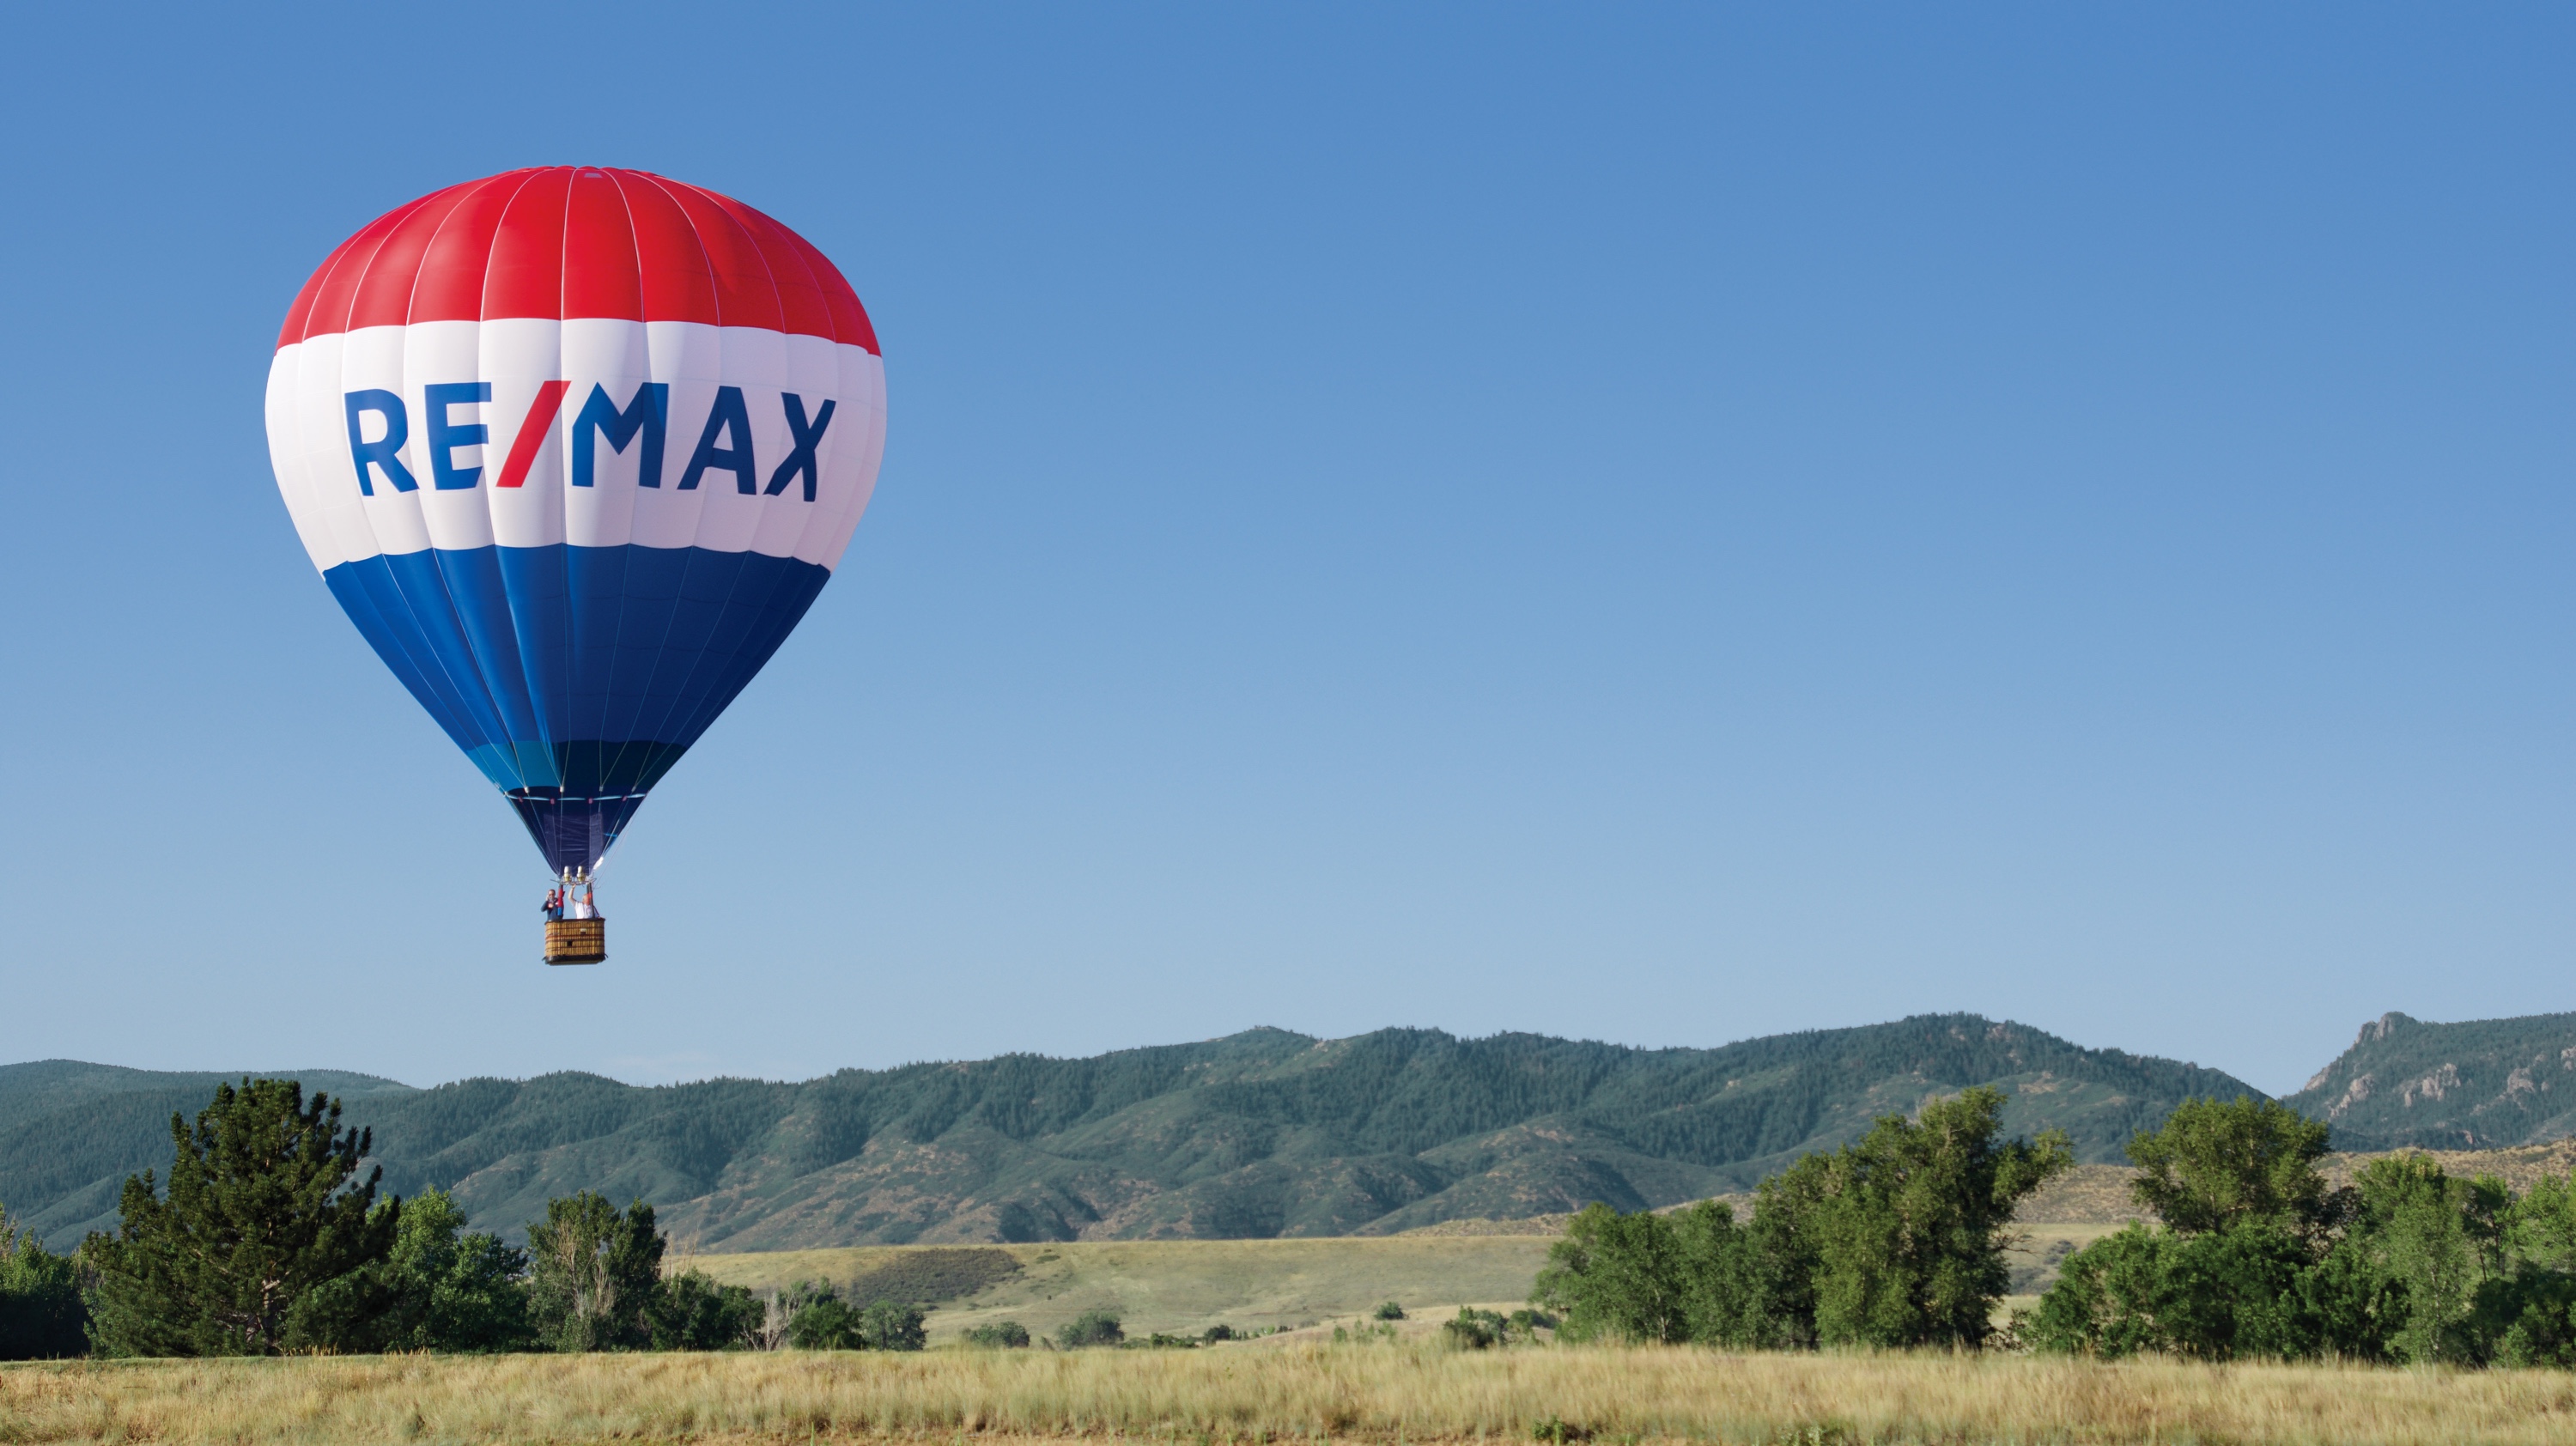 About RE/MAX